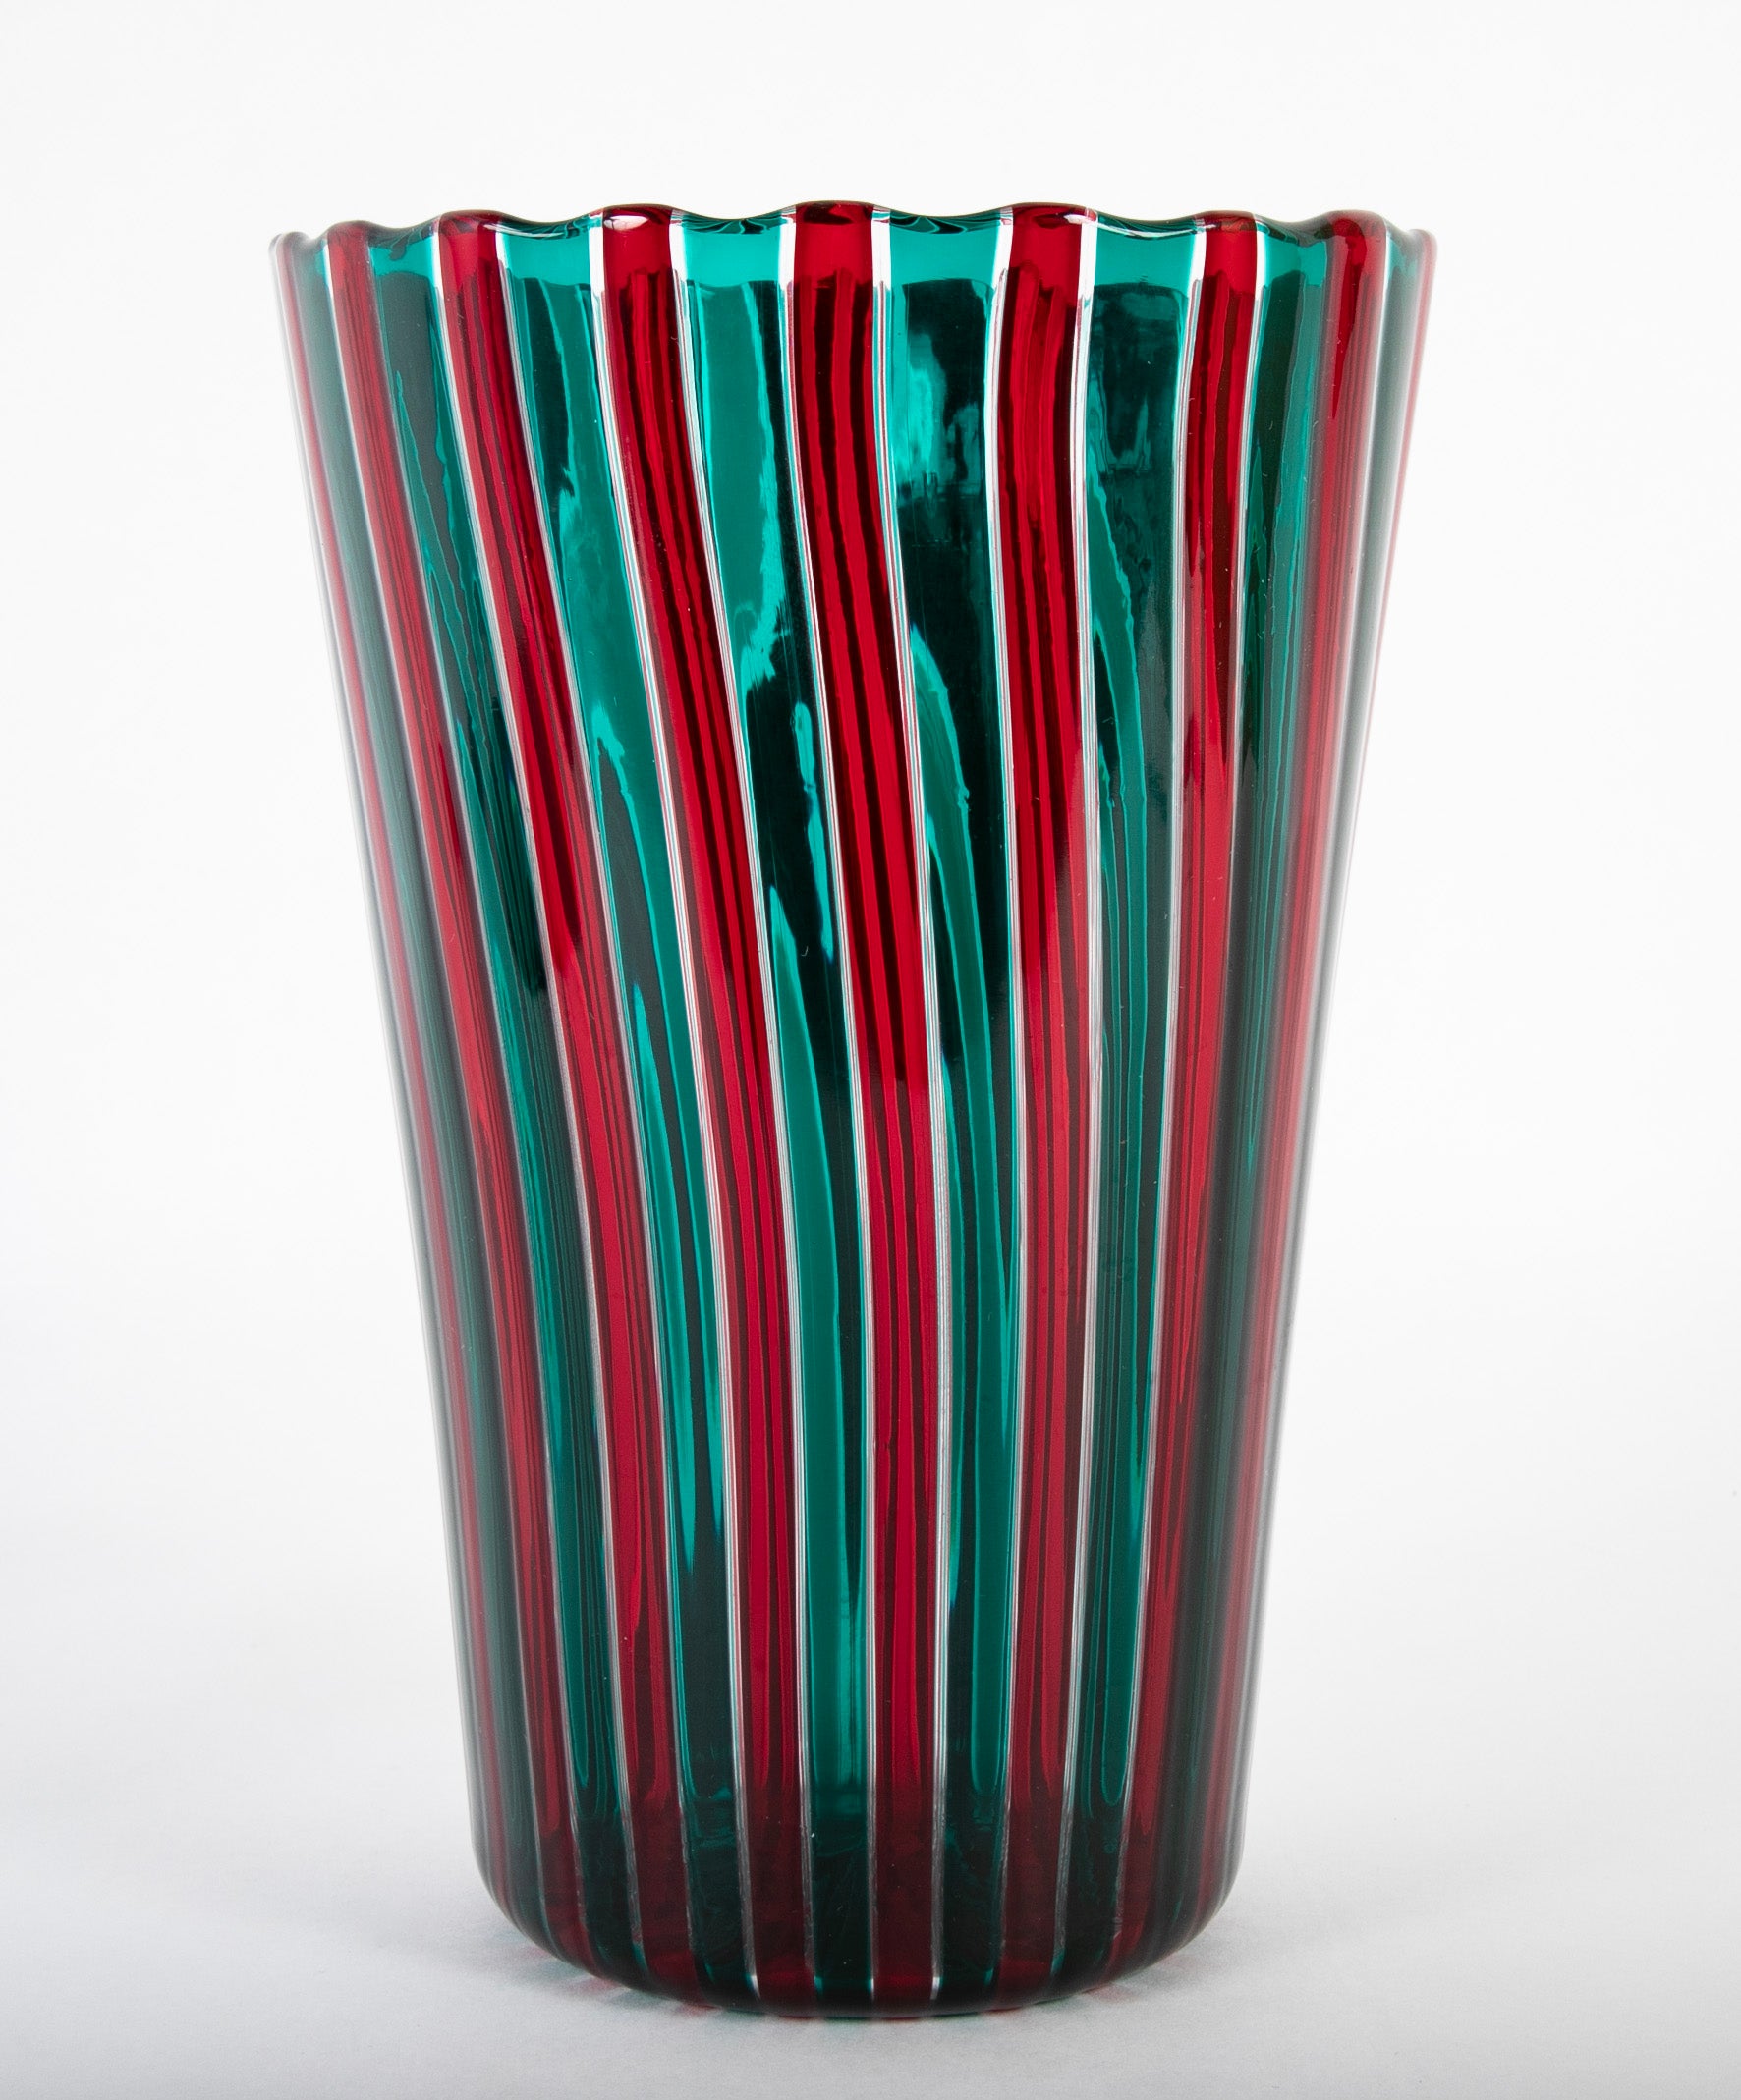 Gio Ponti for Venini Red and Green "A Canne" Glass Vase